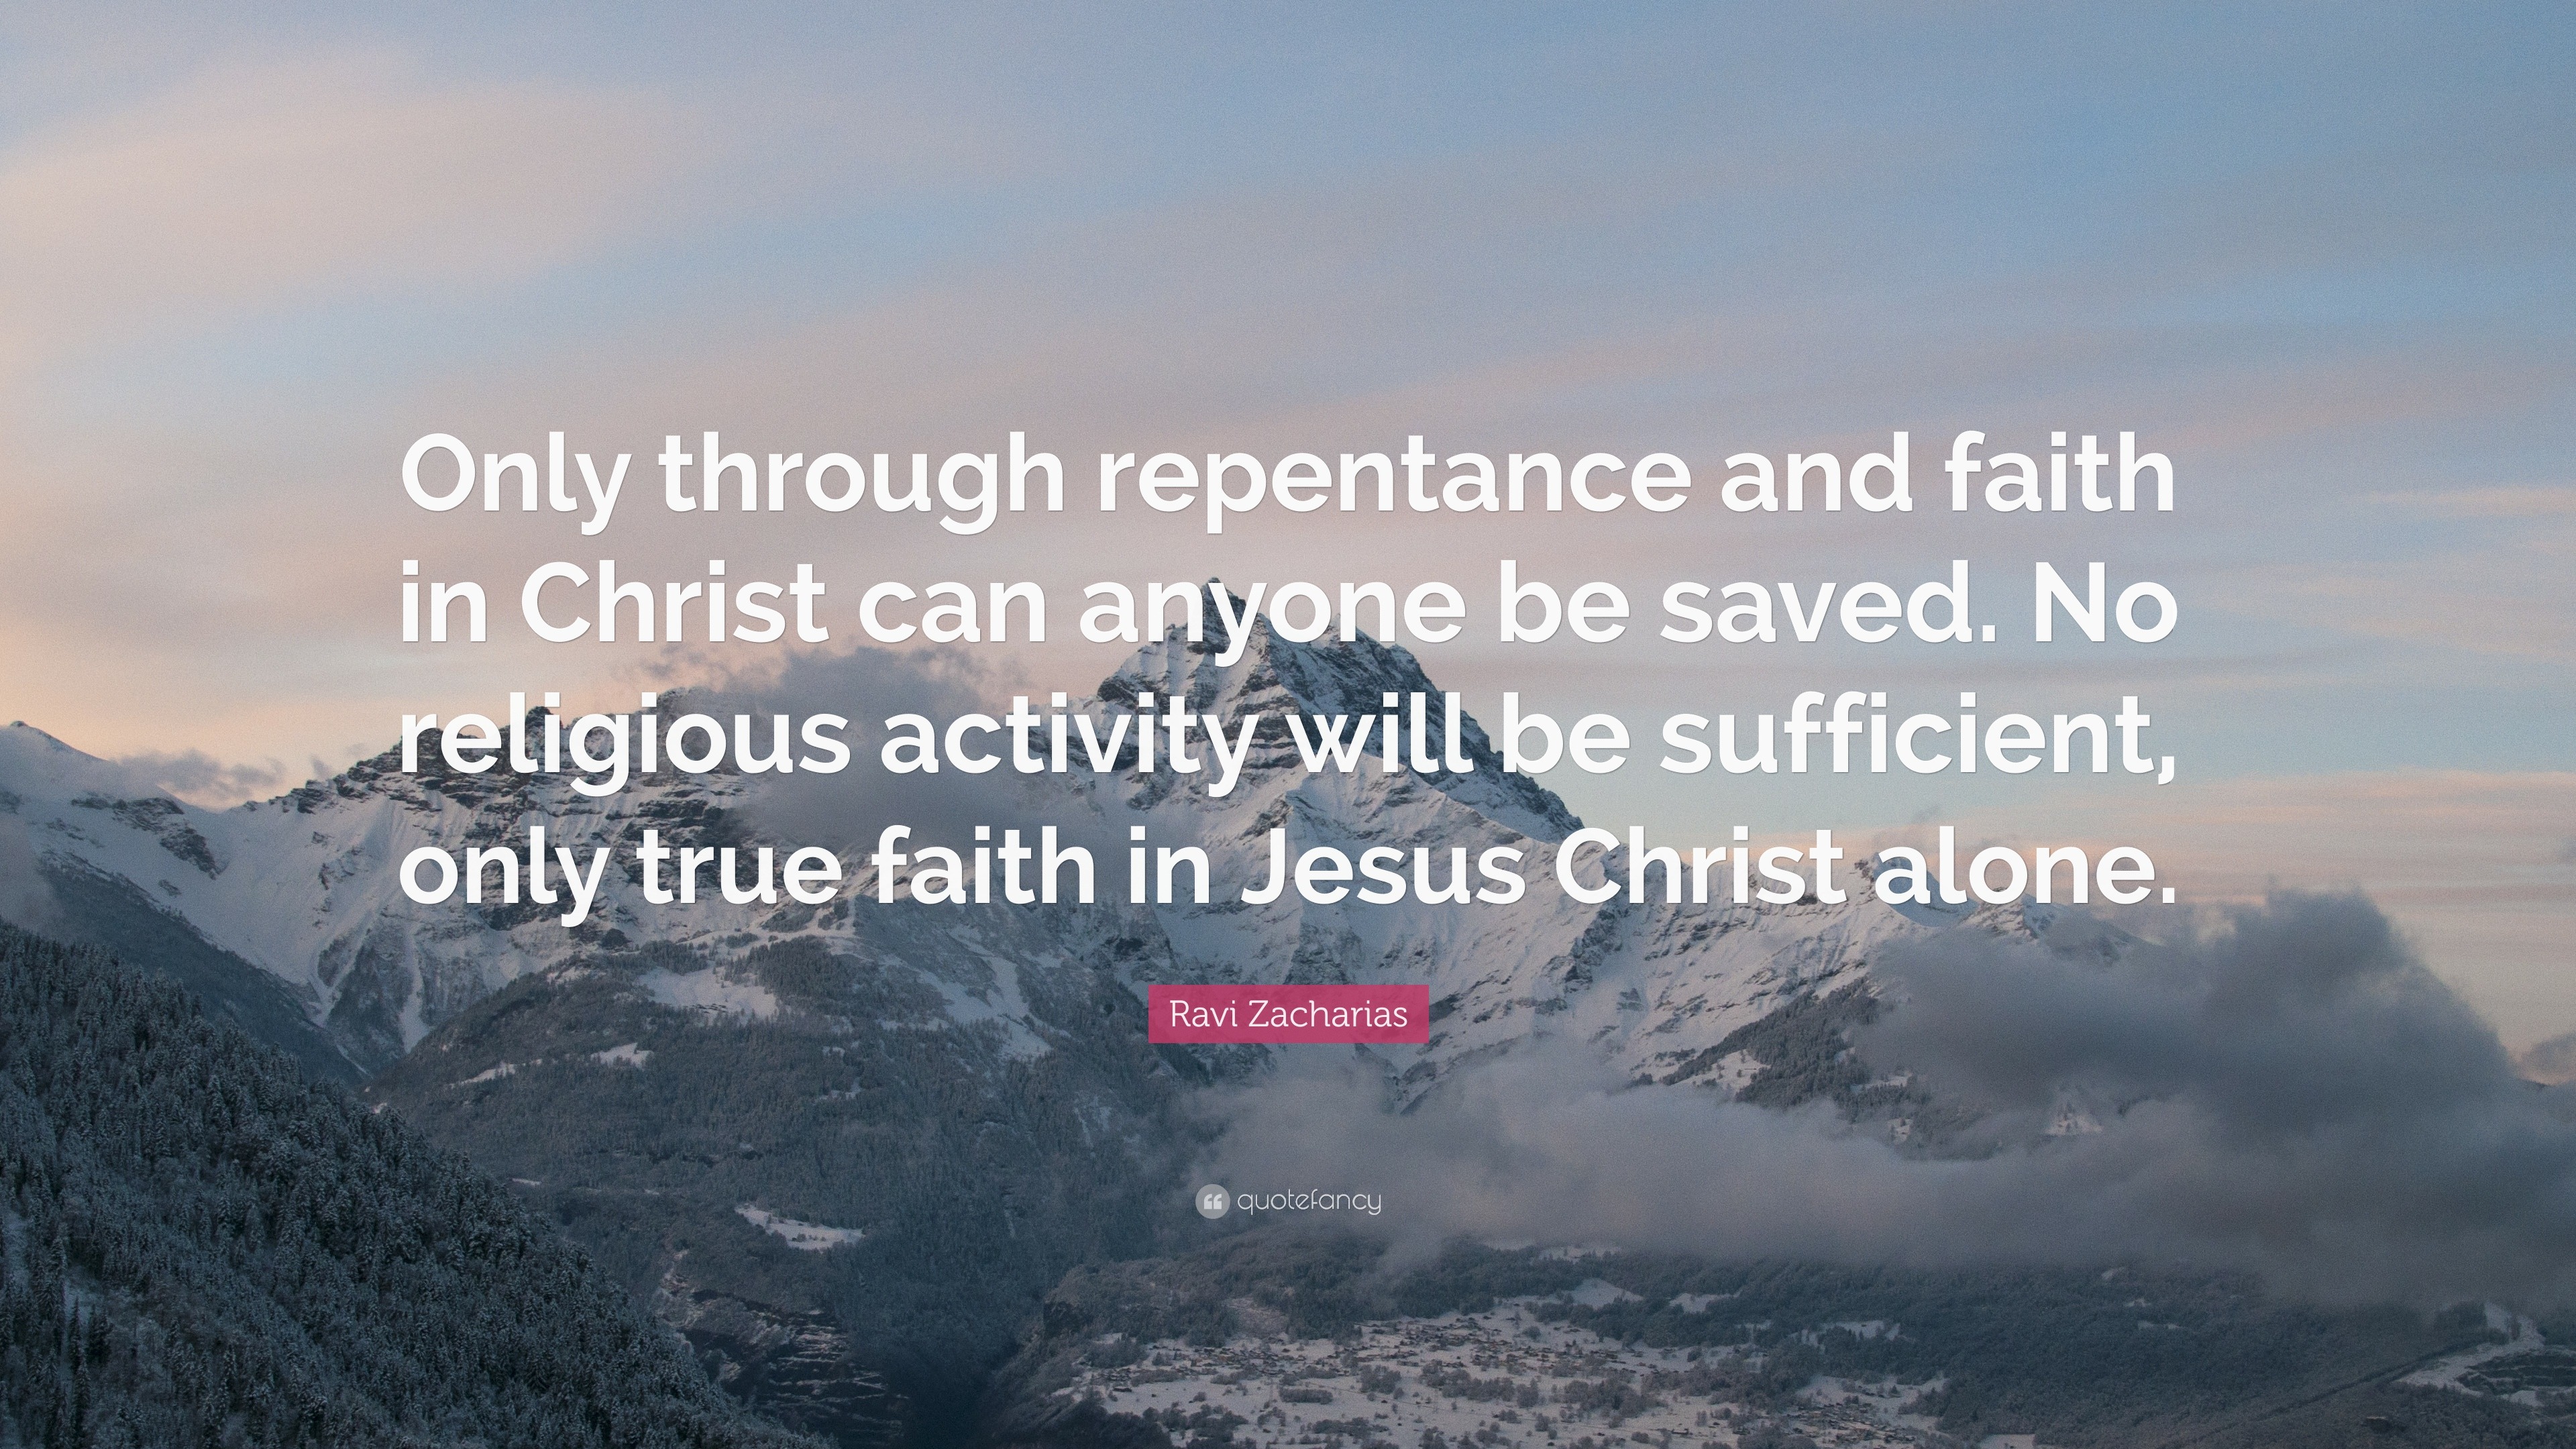 Ravi Zacharias Quote: “Only through repentance and faith in Christ can ...